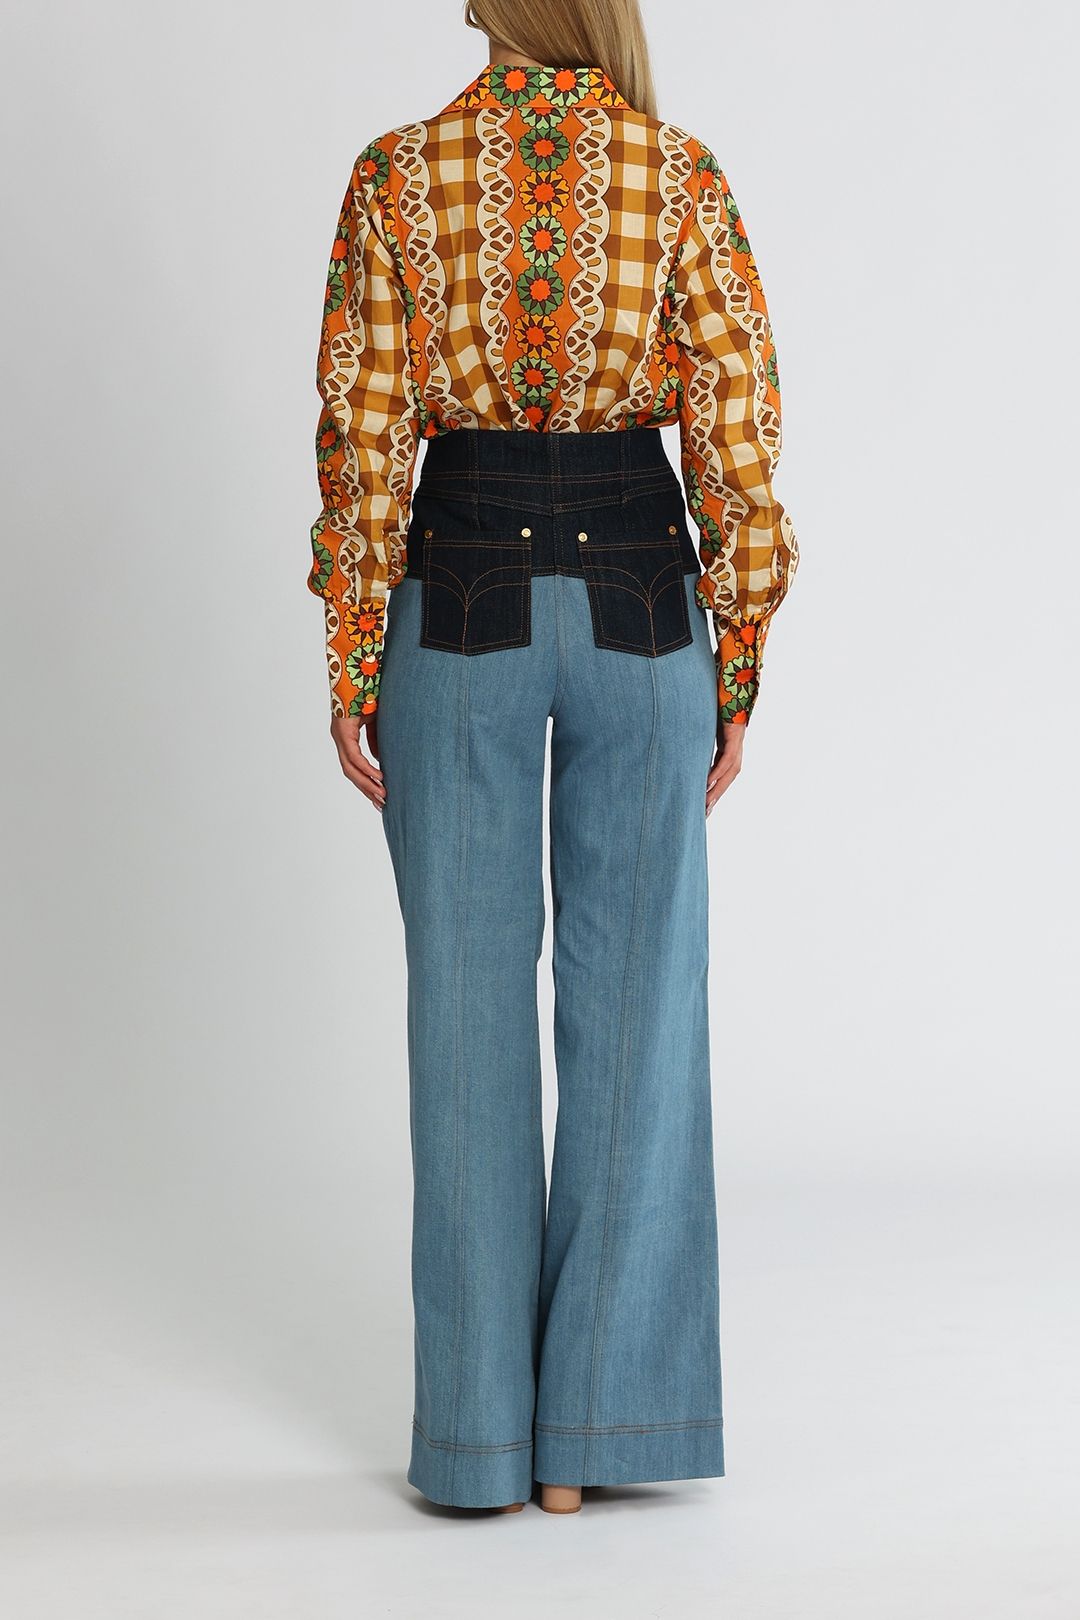 Alice McCall Clara Shirt Multi Relaxed Fit